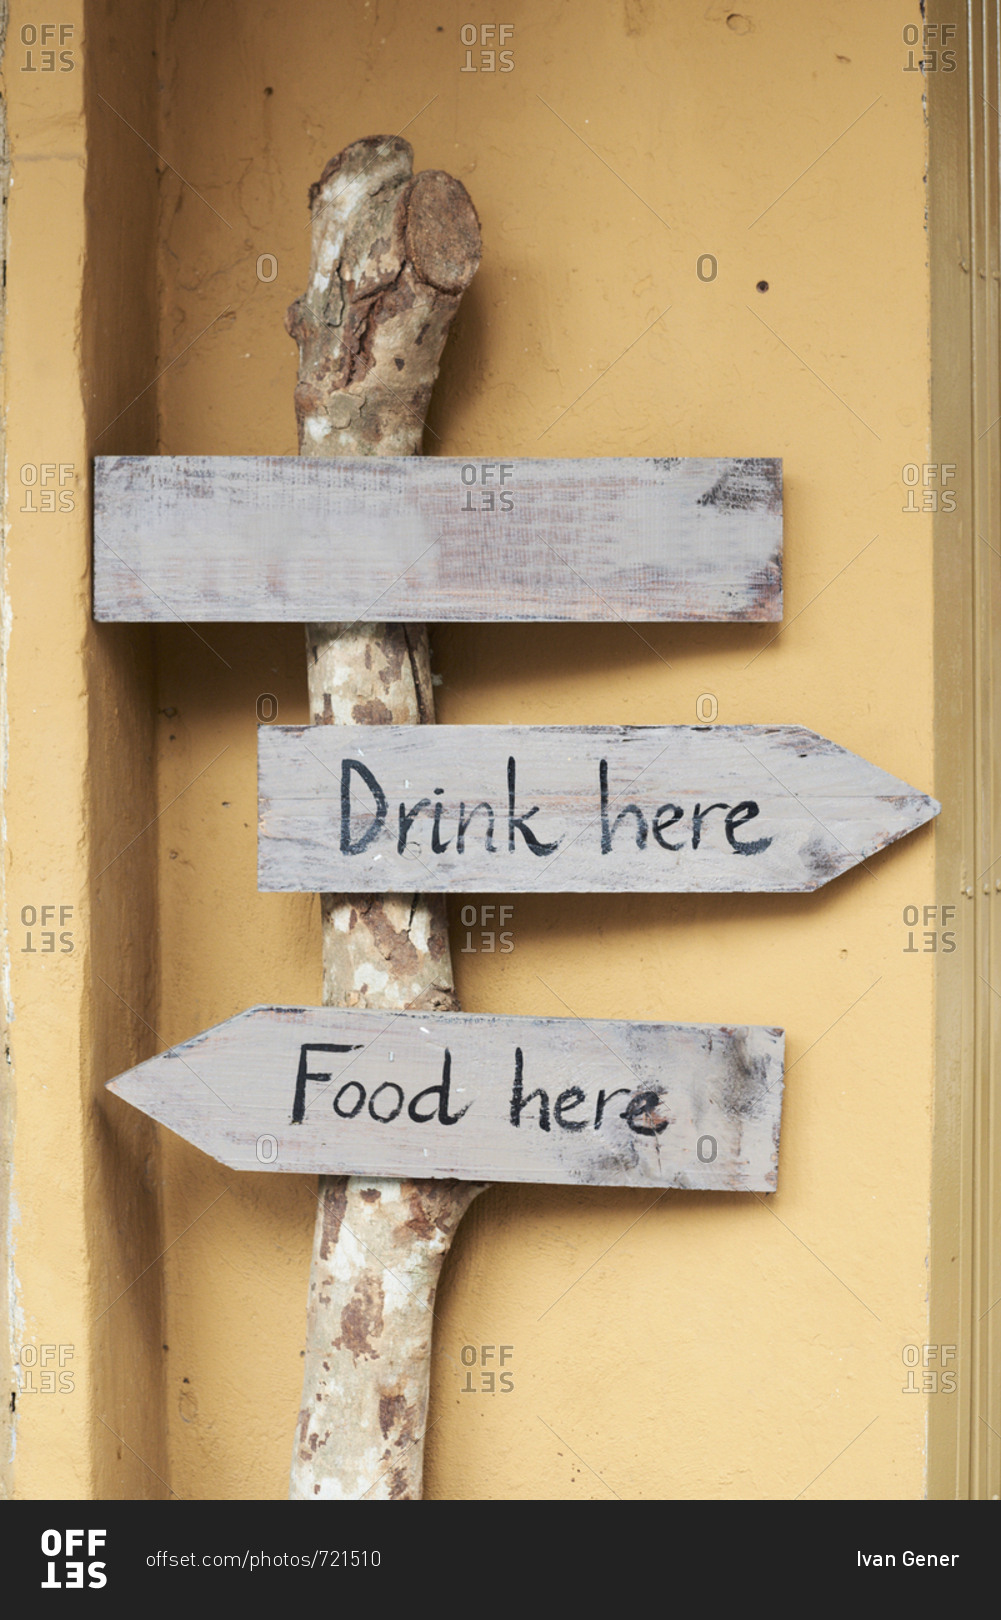 Hand-written wood sign boards with messages of drink and food here pointing in opposite directions